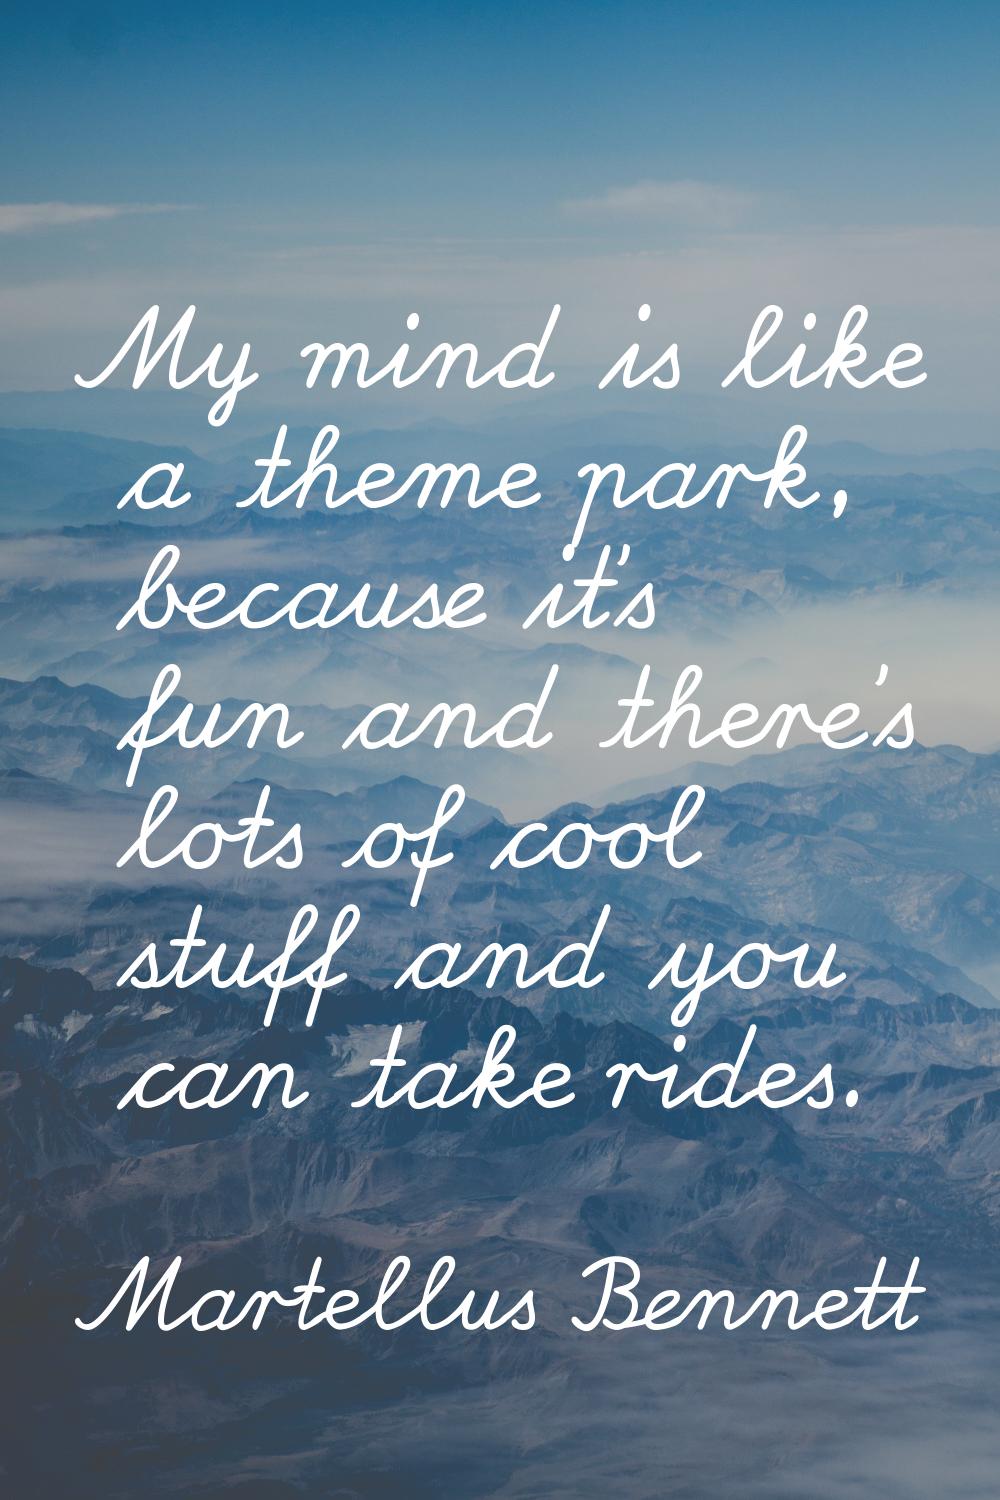 My mind is like a theme park, because it's fun and there's lots of cool stuff and you can take ride